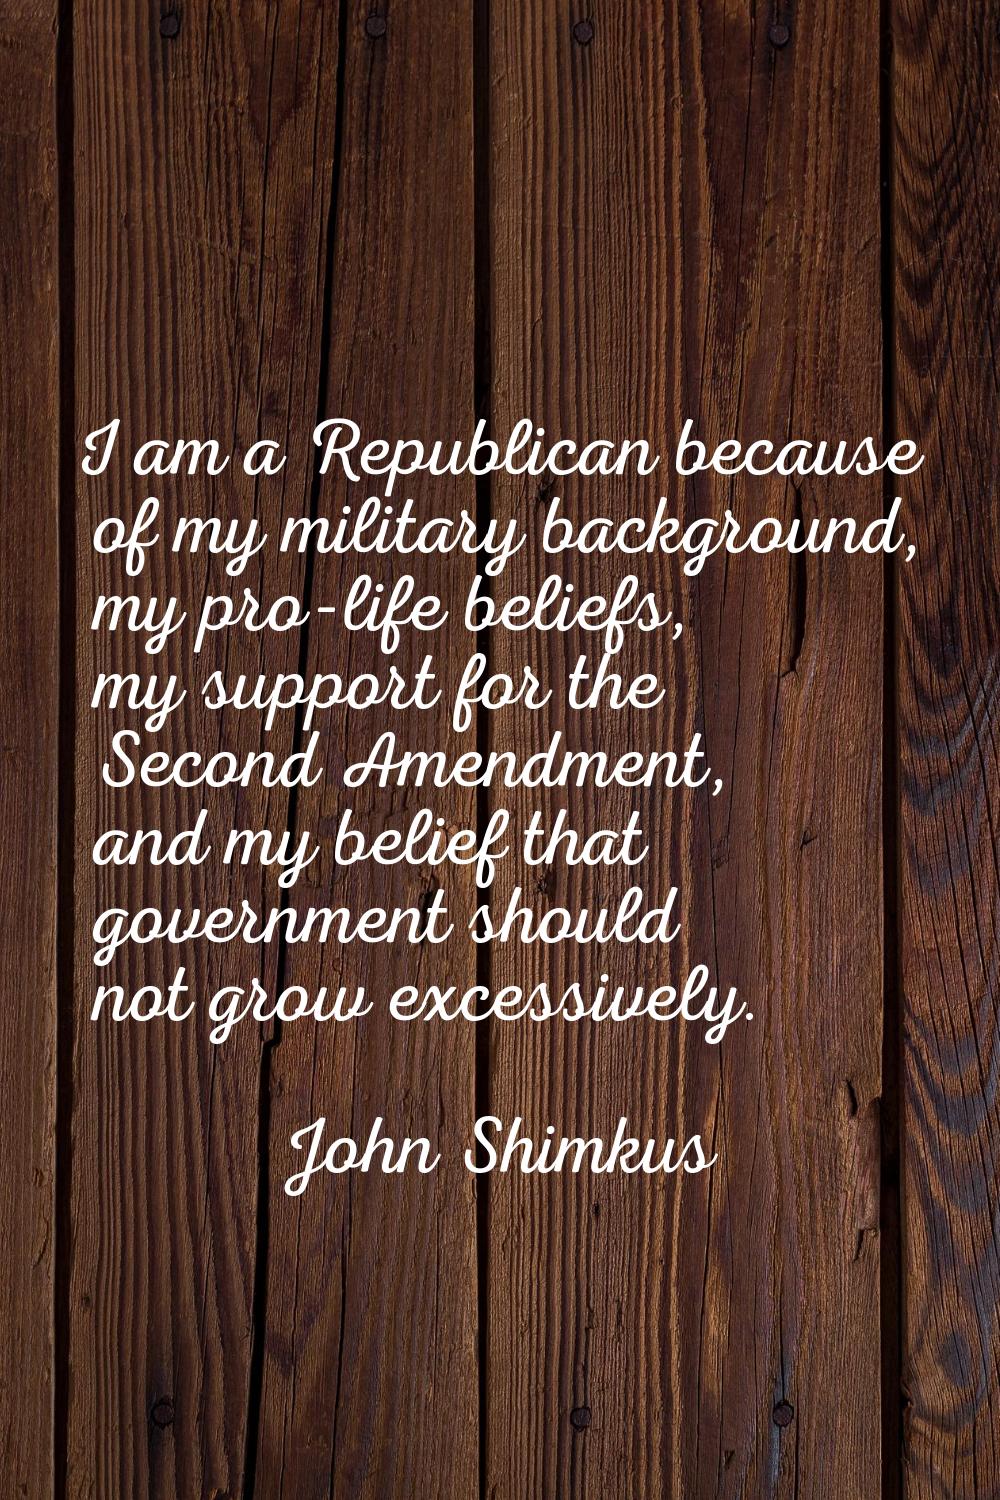 I am a Republican because of my military background, my pro-life beliefs, my support for the Second